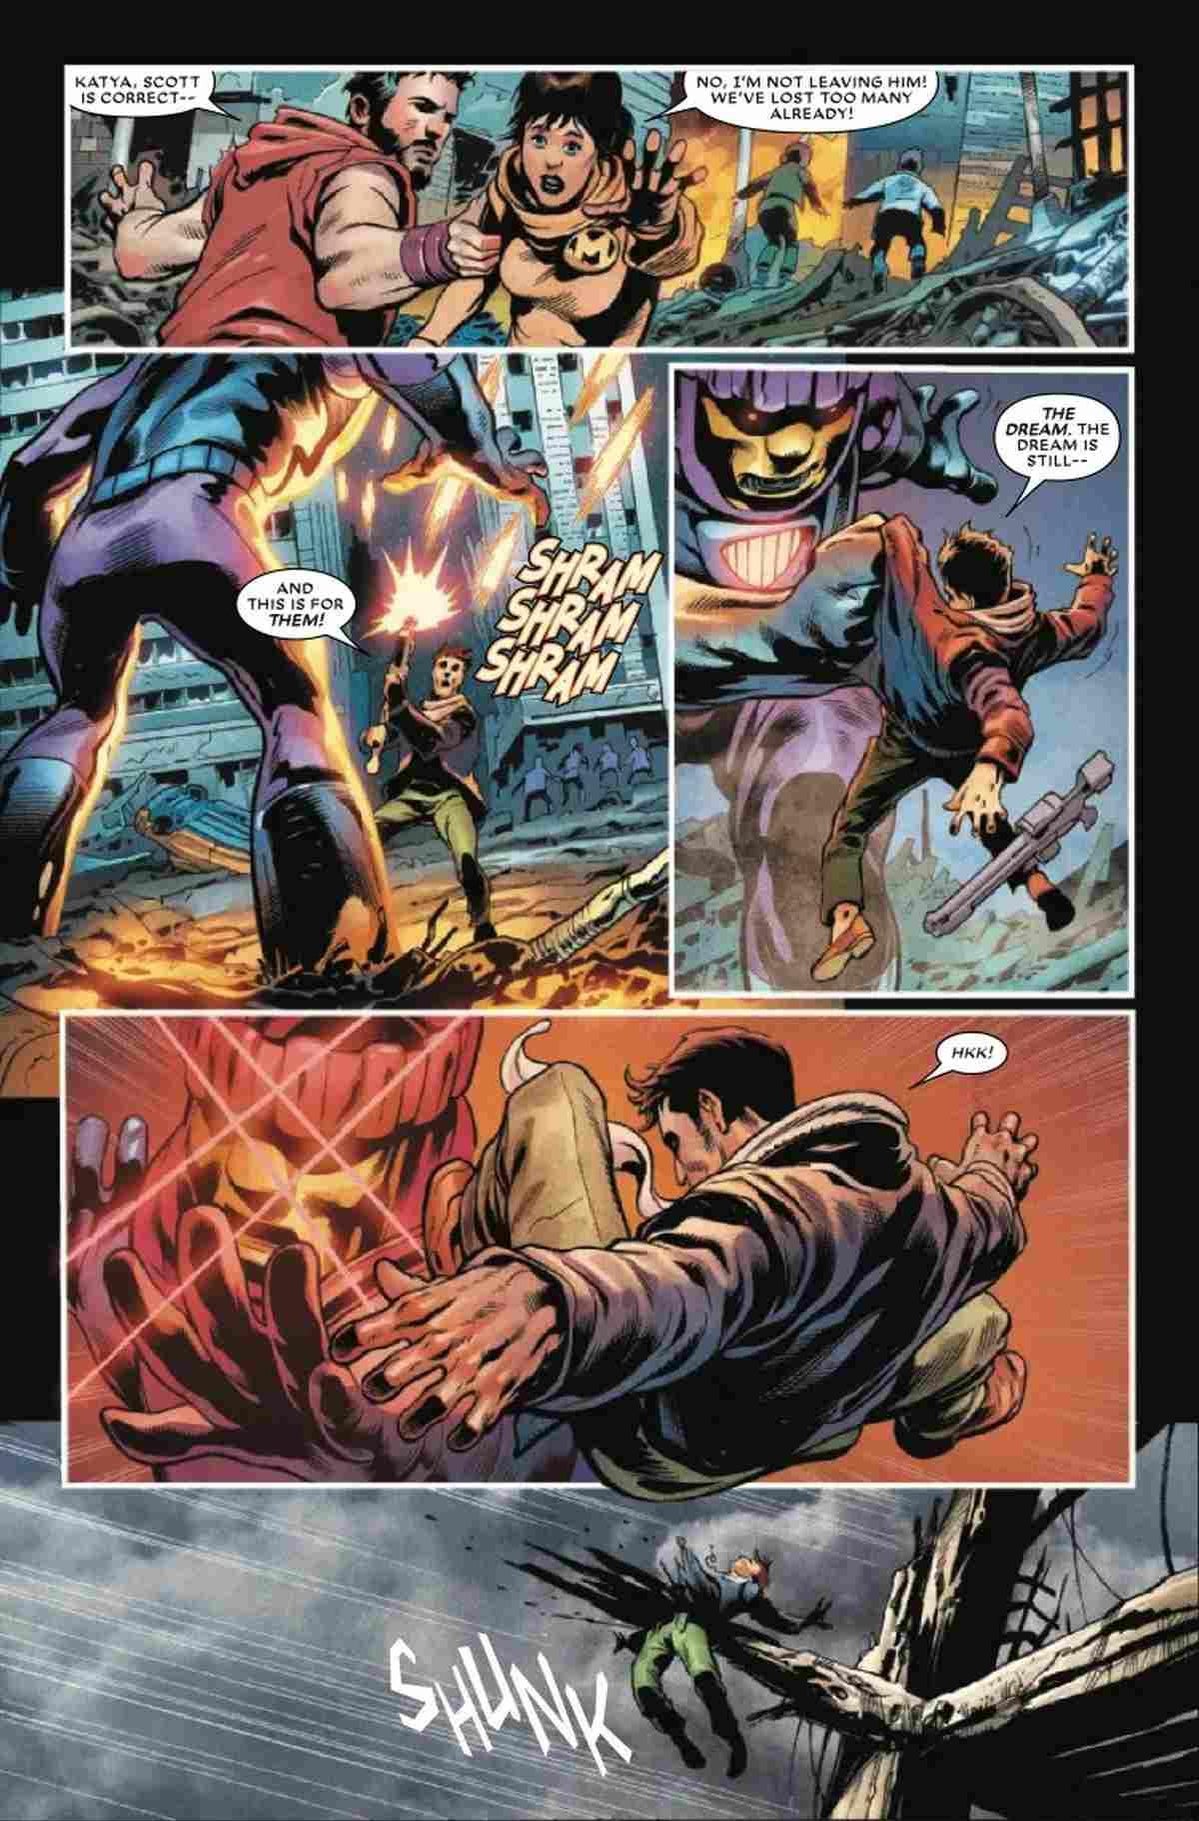 x-men-days-of-future-past-doomsday-1-preview-page-3.jpg